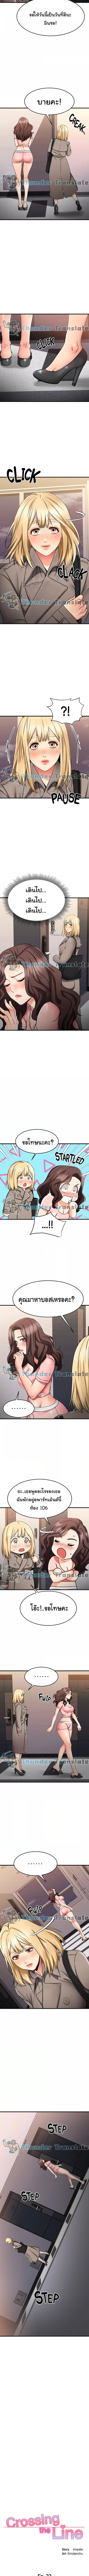 My Female Friend Who Crossed The Line 33 ภาพที่ 2